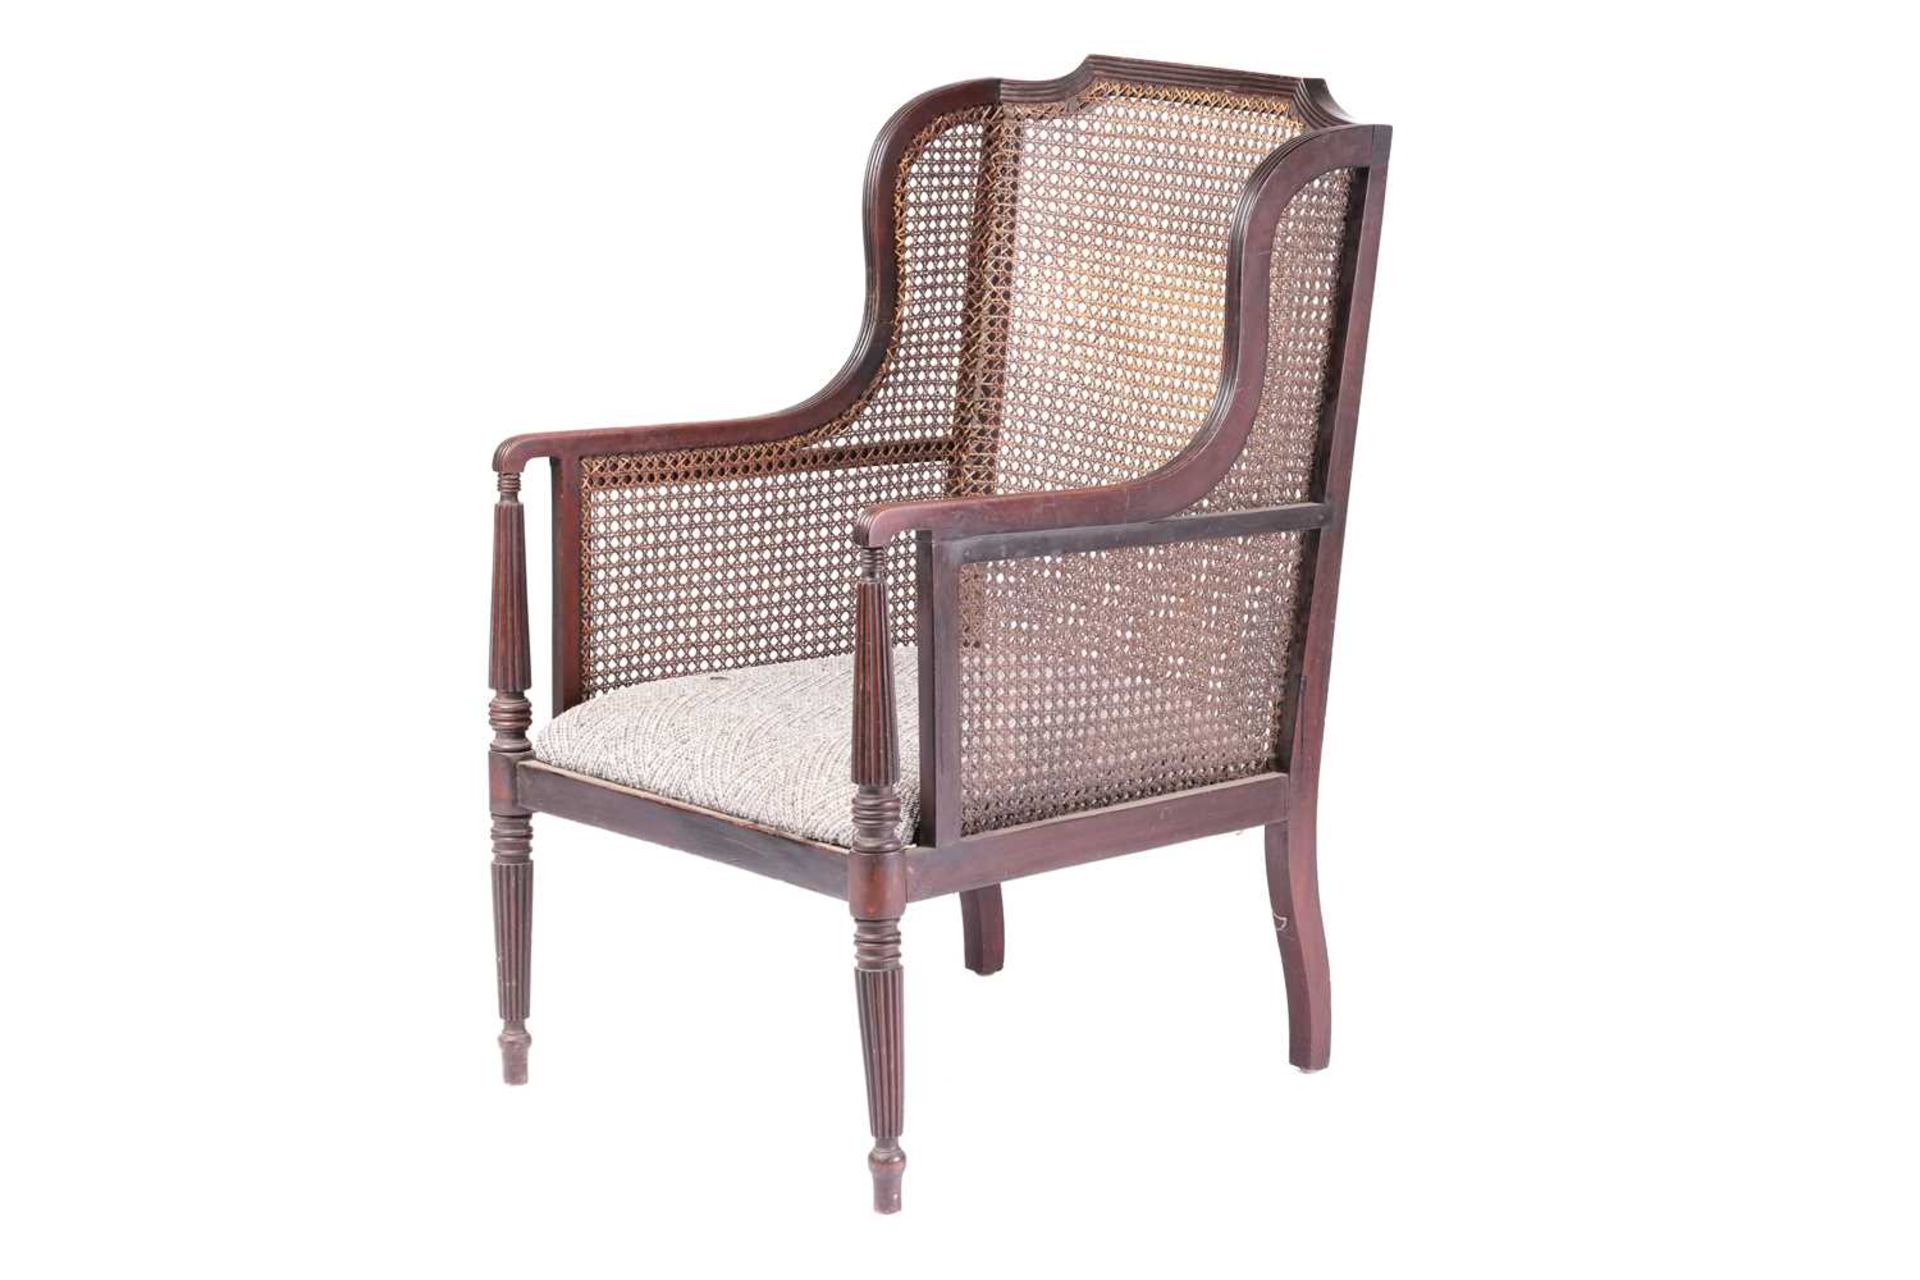 A 19th-century bergère library chair with cluster column front legs, 58 cm wide x 65 cm deep x 97 cm - Image 3 of 16